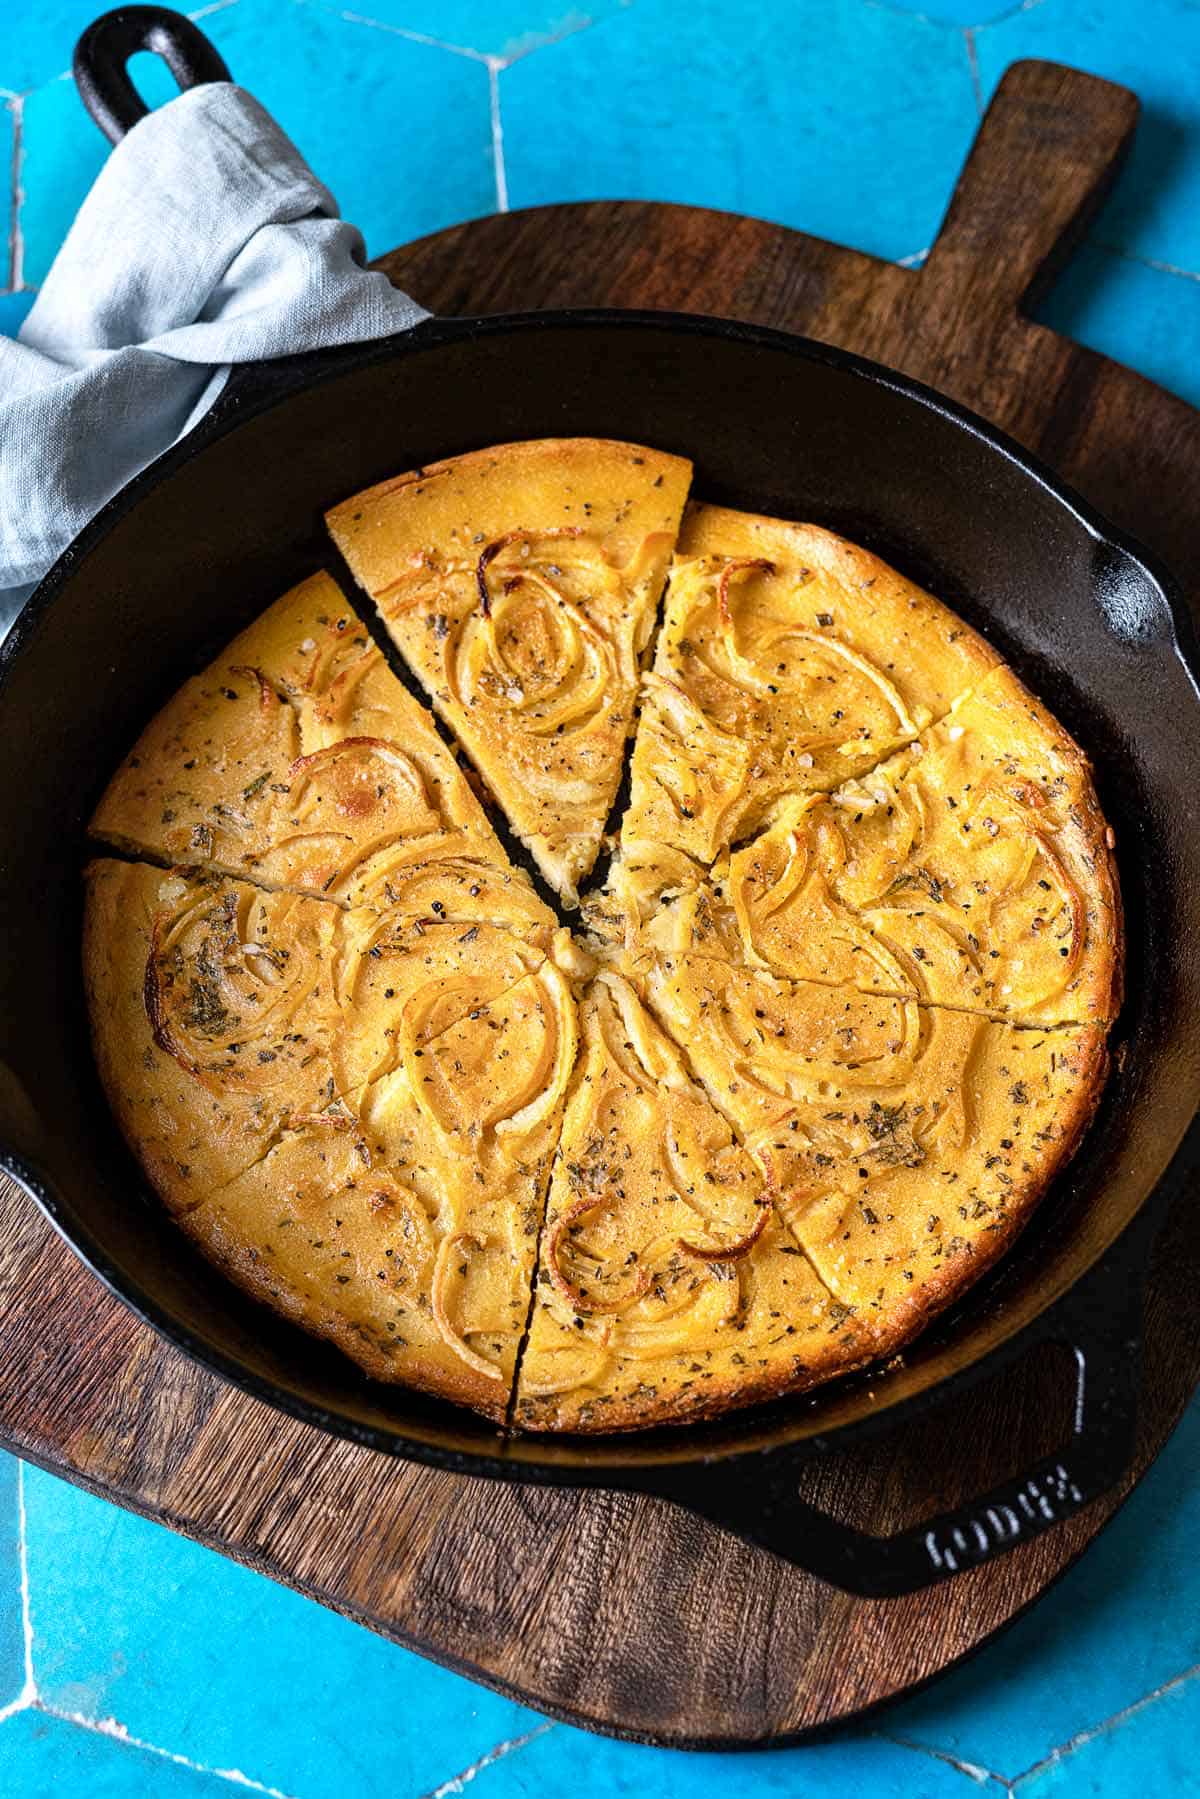 a baked farinata italian chickpea pancake sliced into pieces in a cast iron skillet.